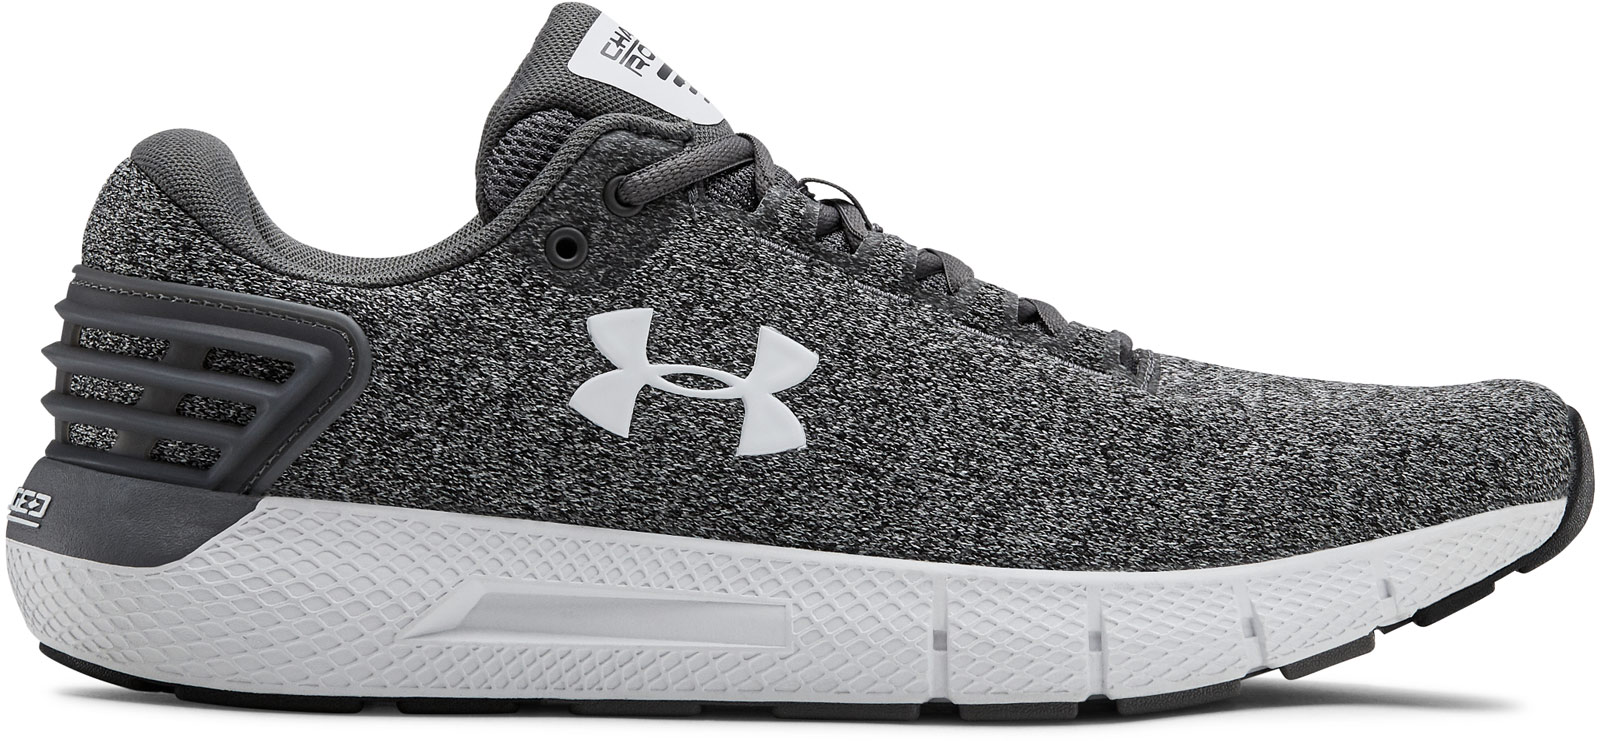 charged rogue twist under armour